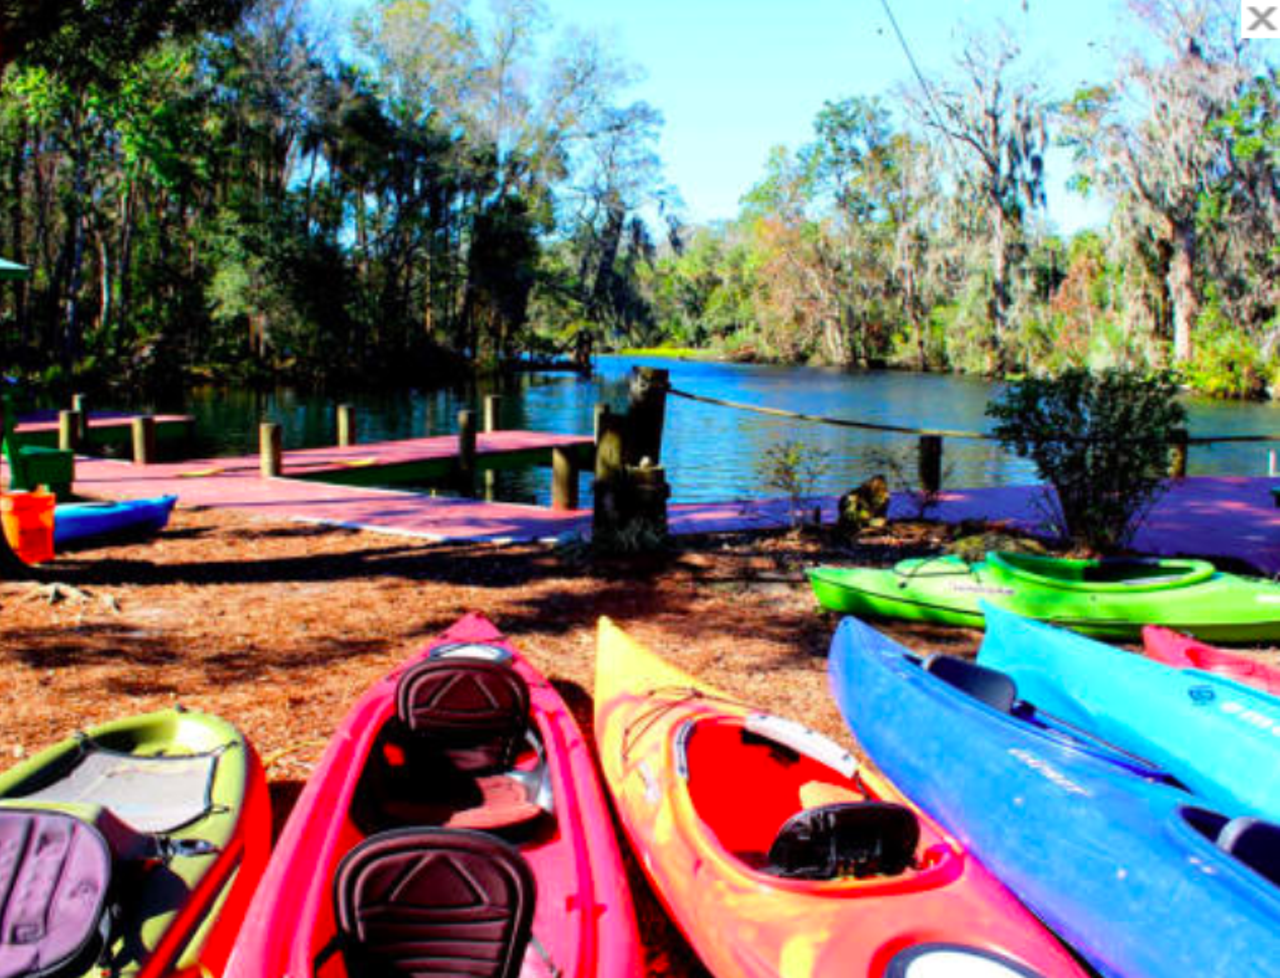 Paddle your way down the Chaz
8600 W Miss Maggie Dr., Chassahowitzka, 352-382-2200, Click here for more info  
Affectionately coined &#147;the Chaz,&#148; the Chassahowitzka river offers a convenient kayak and canoe launch area, from which guests can travel down the clear blue spring waters. 
Photo via Chassahowitzka River/Website